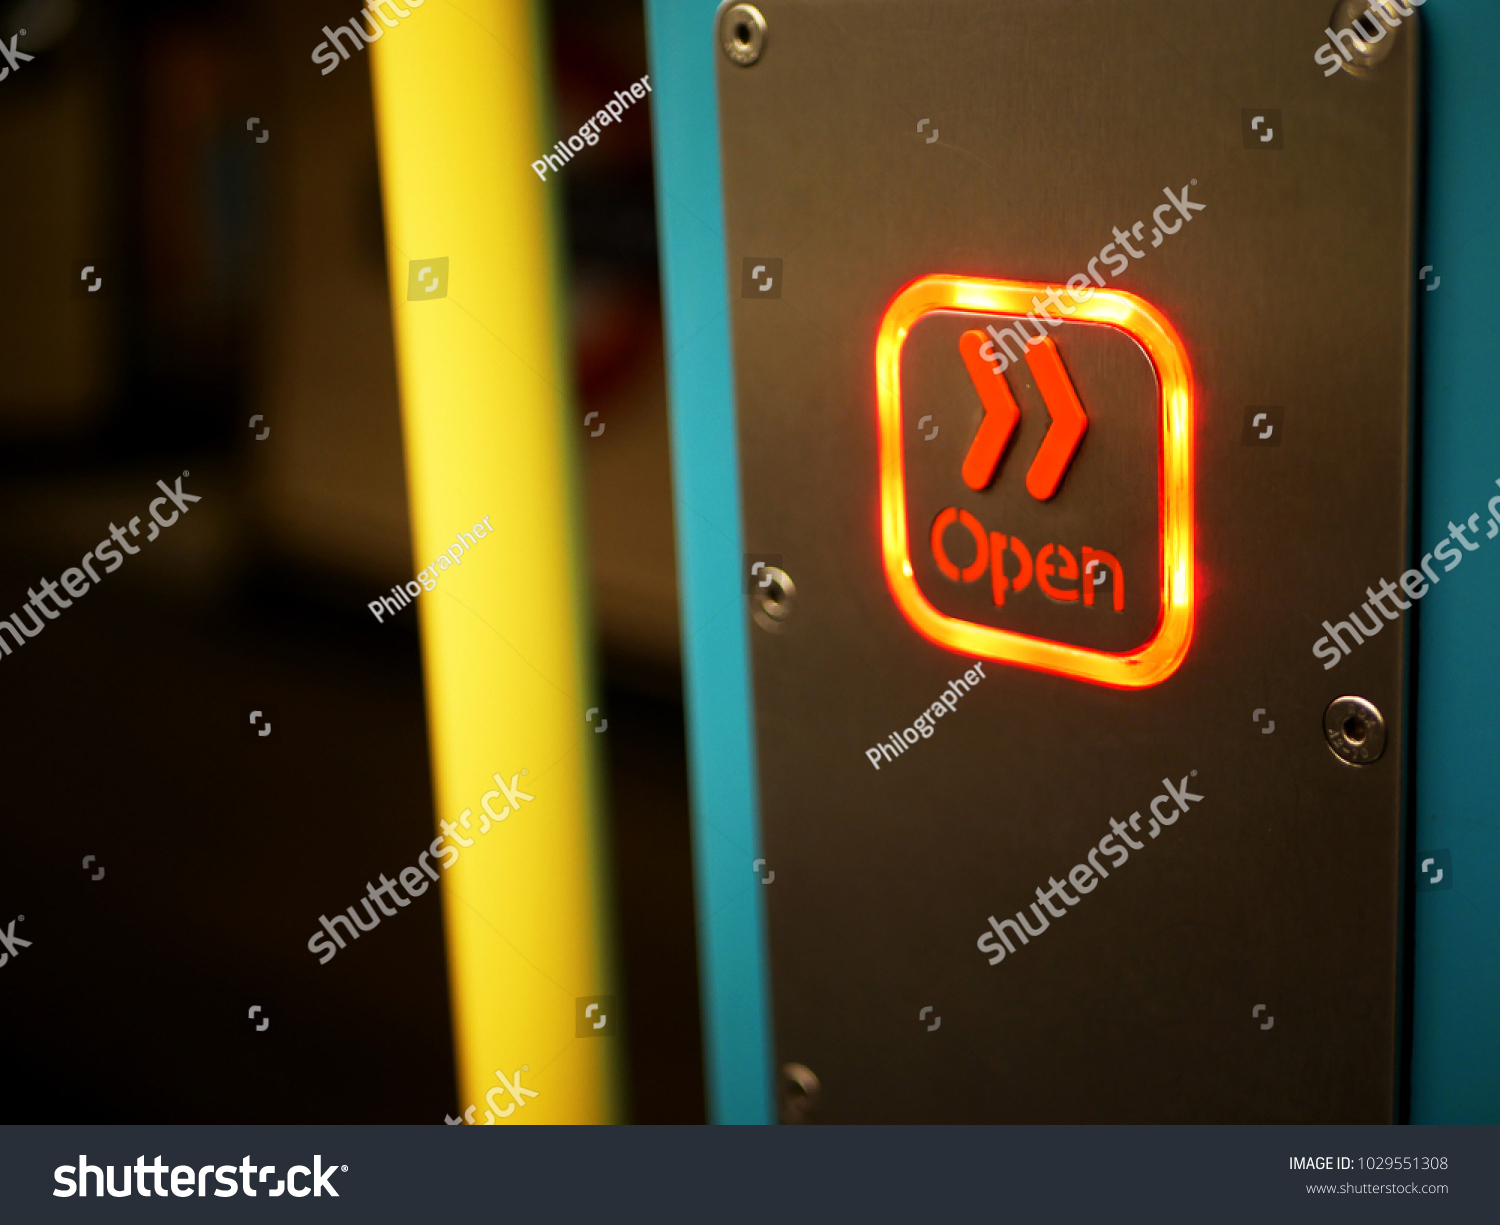 Concept of openness shown by lit 'open' sign with orange chevrons on metropolitan line train on london underground, with yellow pole and view to underground symbol on the platform #1029551308